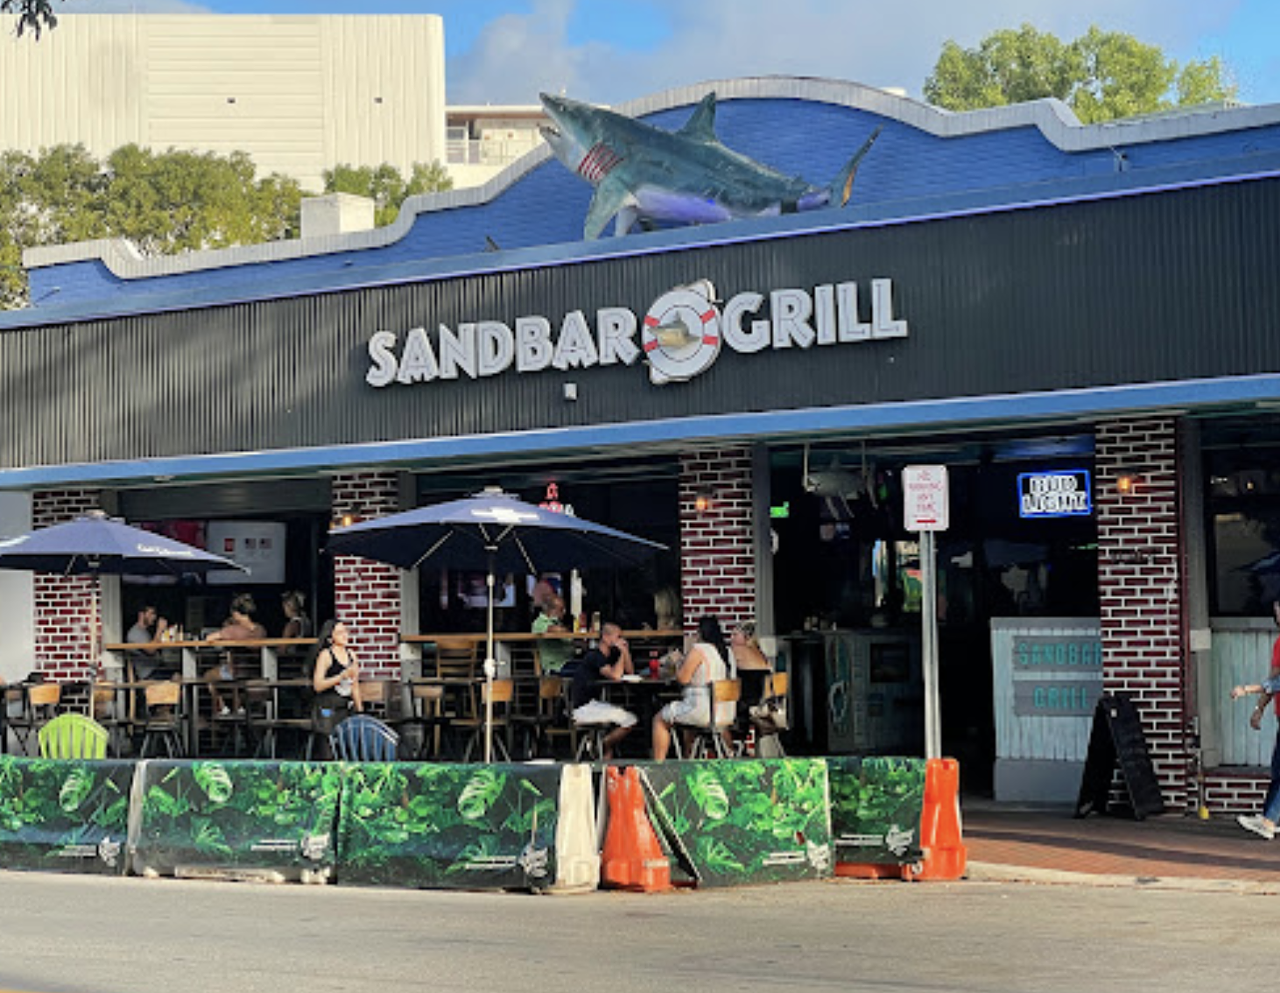 Sandbar Sports Grill 
3064 Grand Ave., Coconut Grove
Although they changed their name to The Hot Rock Bar & Grille during the “Bar Rescue” episode, the owners have since changed their name back to Sandbar Sports Grill. However, in classic “Bar Rescue” fashion, Taffer helped the bar redecorate, attract a new demographic and taught the bartenders some new recipes. Despite being closed from 2020-2021 due to a fire, Sandbar is currently back in business.
Photo via Sandbar Sports Grill/Google